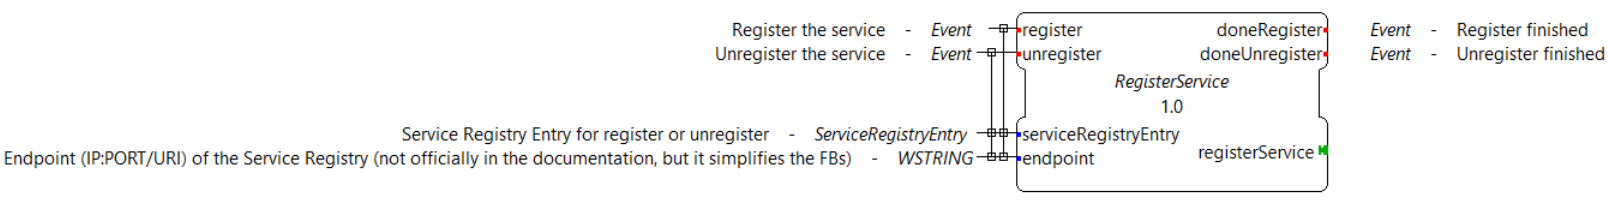 Abstract definition of the Register Service offered by the Service Registry core system